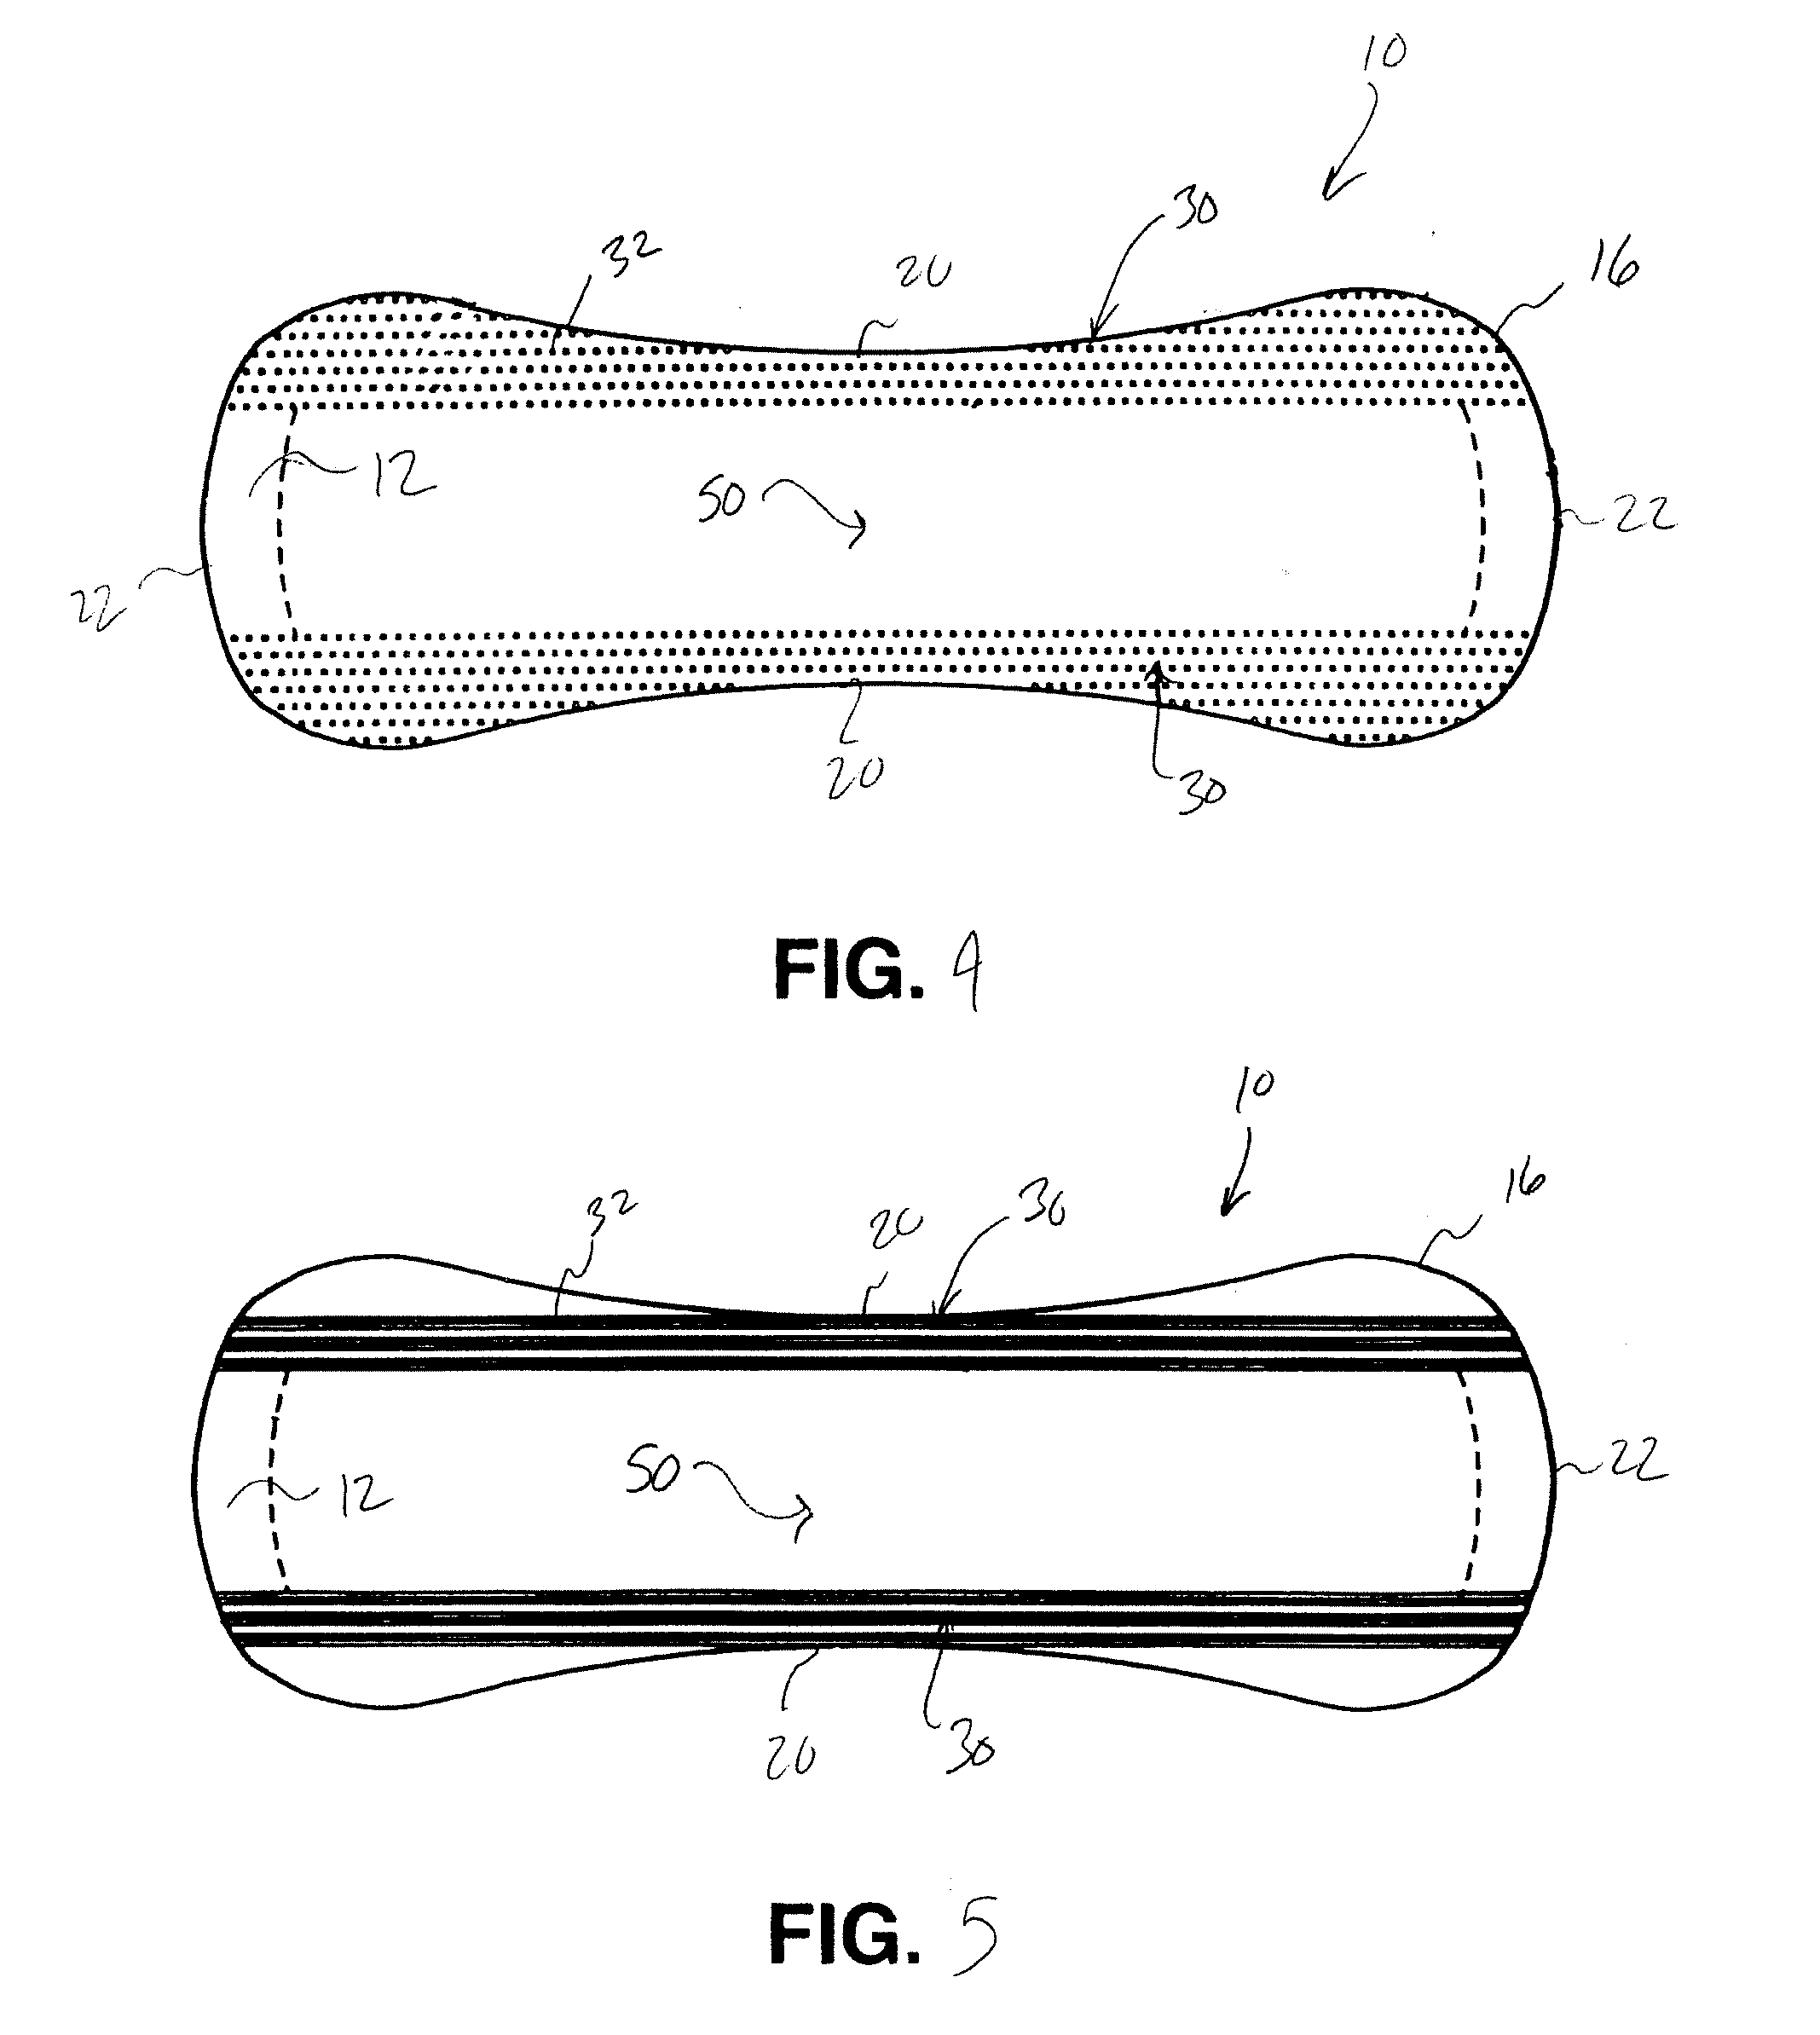 Zoned application of decolorizing composition for use in absorbent articles